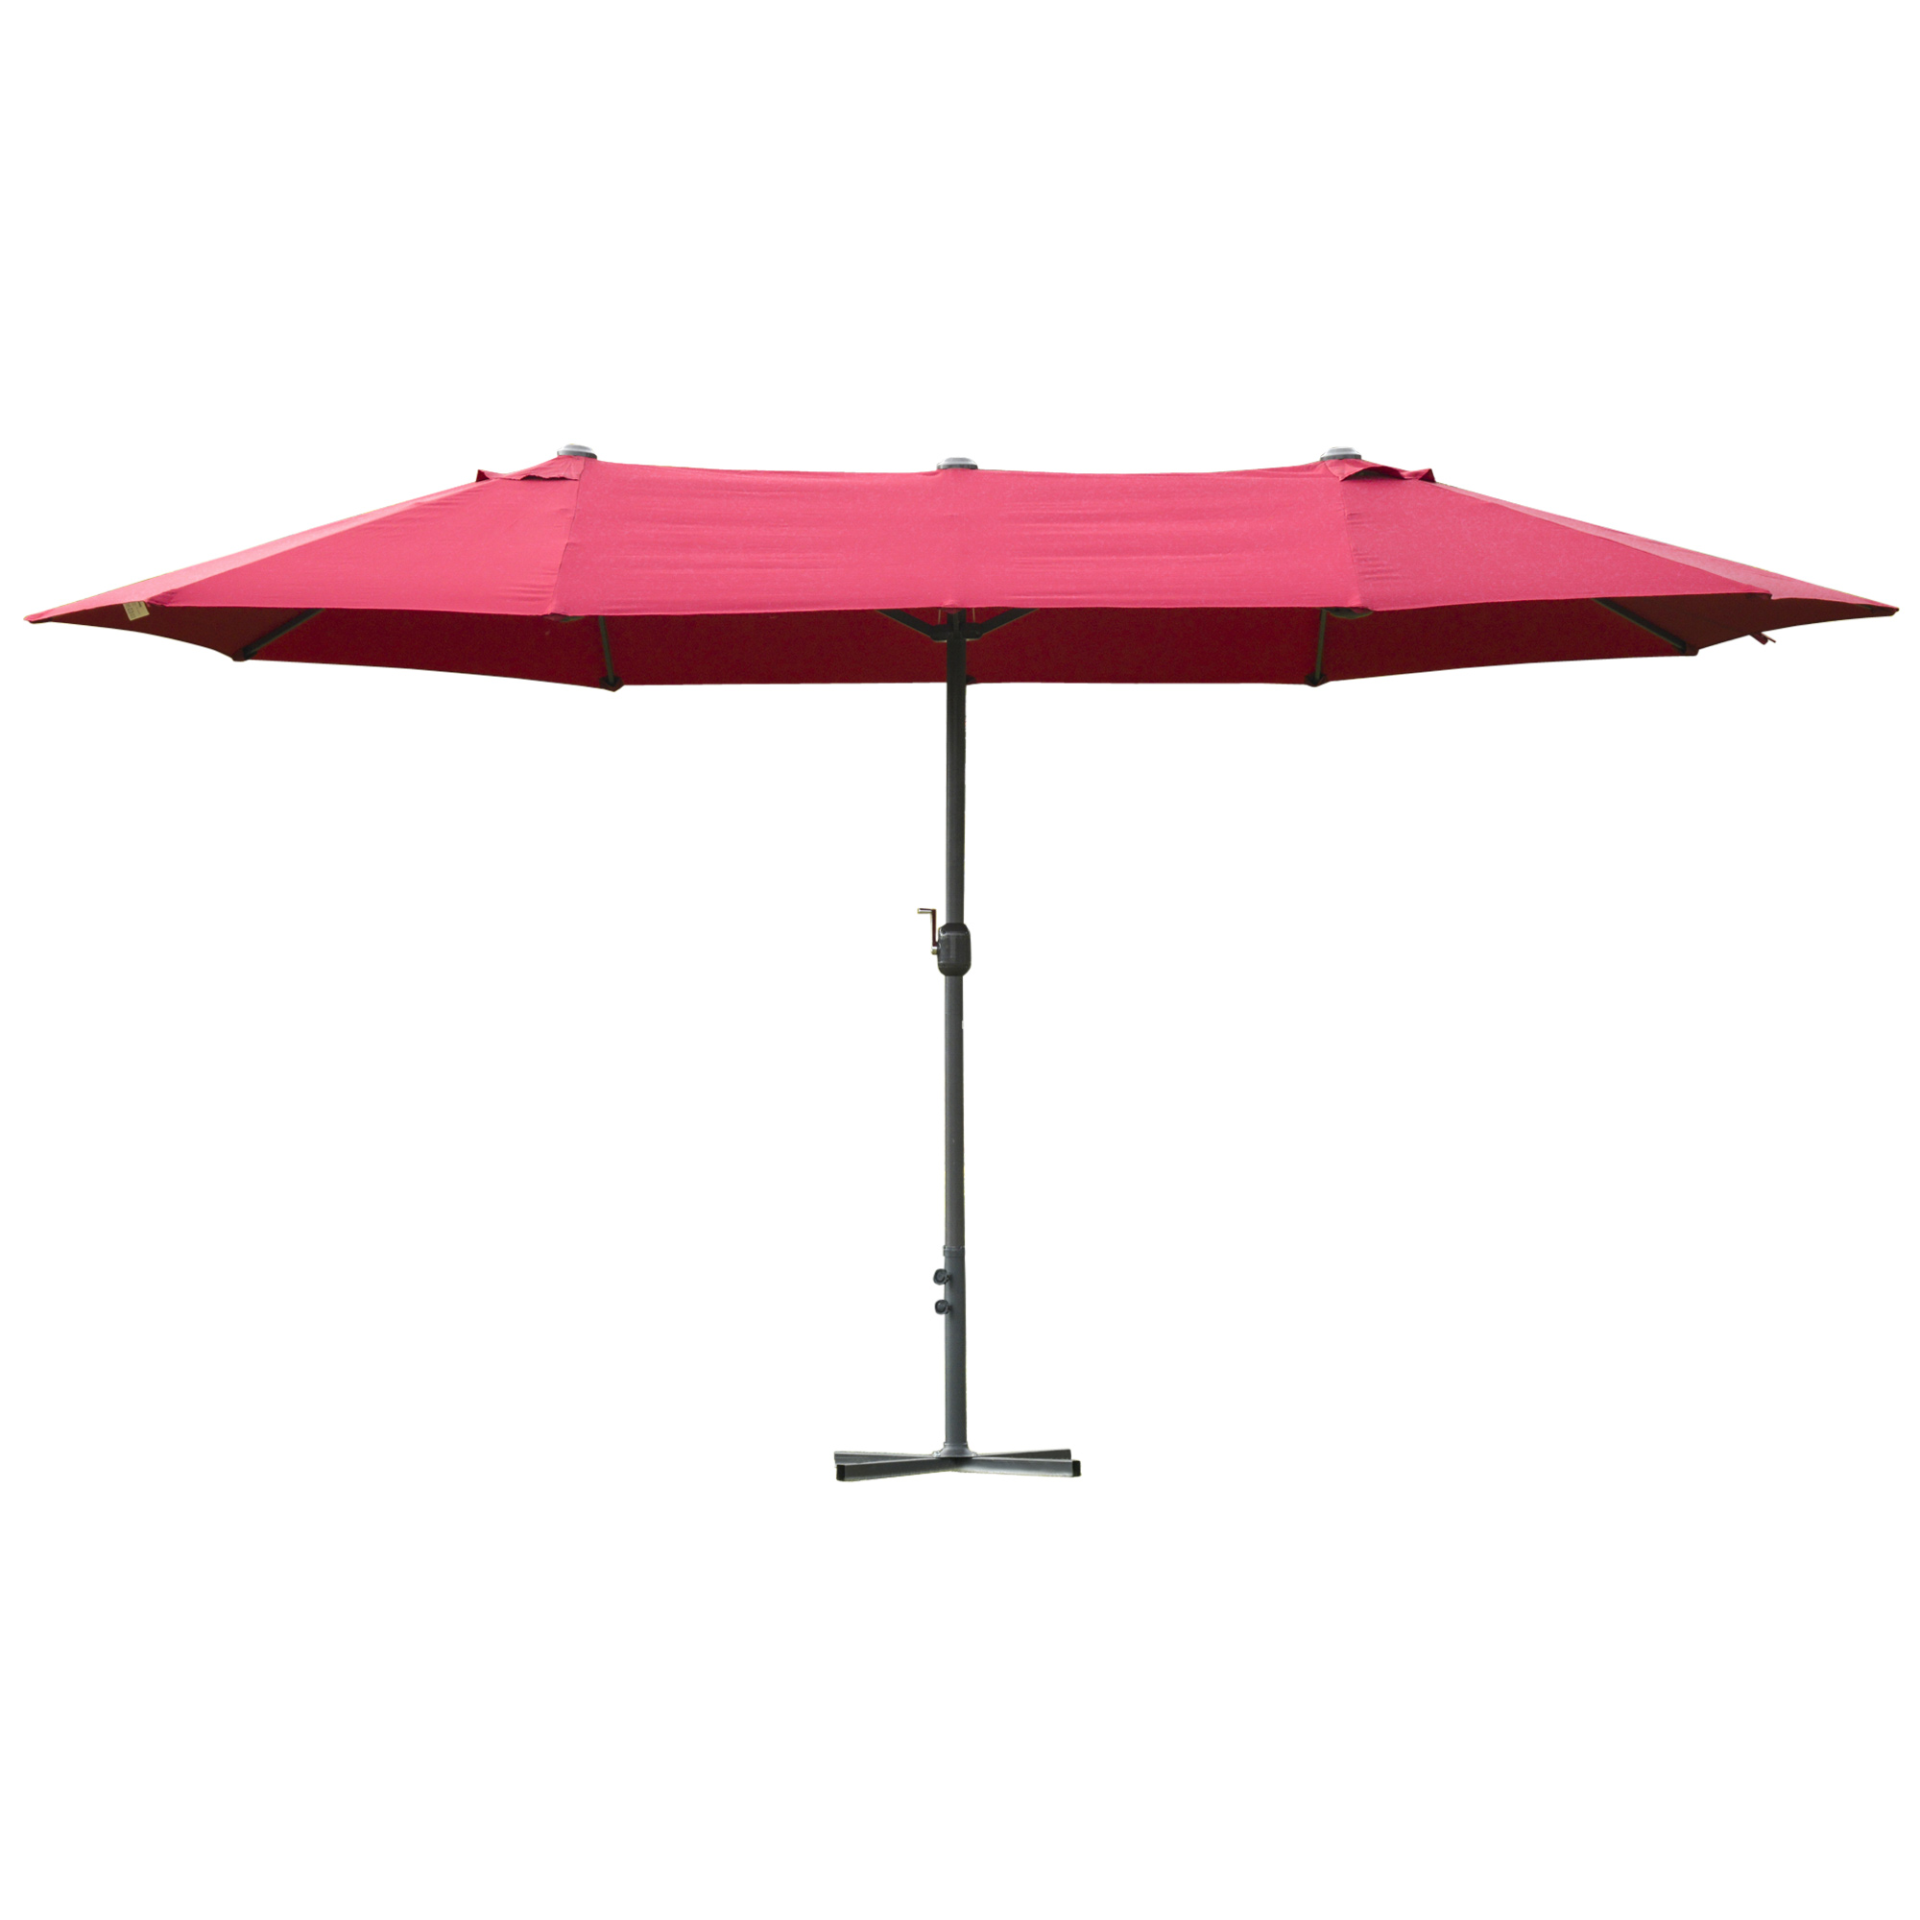 Outsunny 4.6m Garden Parasol Double-Sided Sun Umbrella Patio Market Shelter Canopy Shade Outdoor with Cross Base – Red